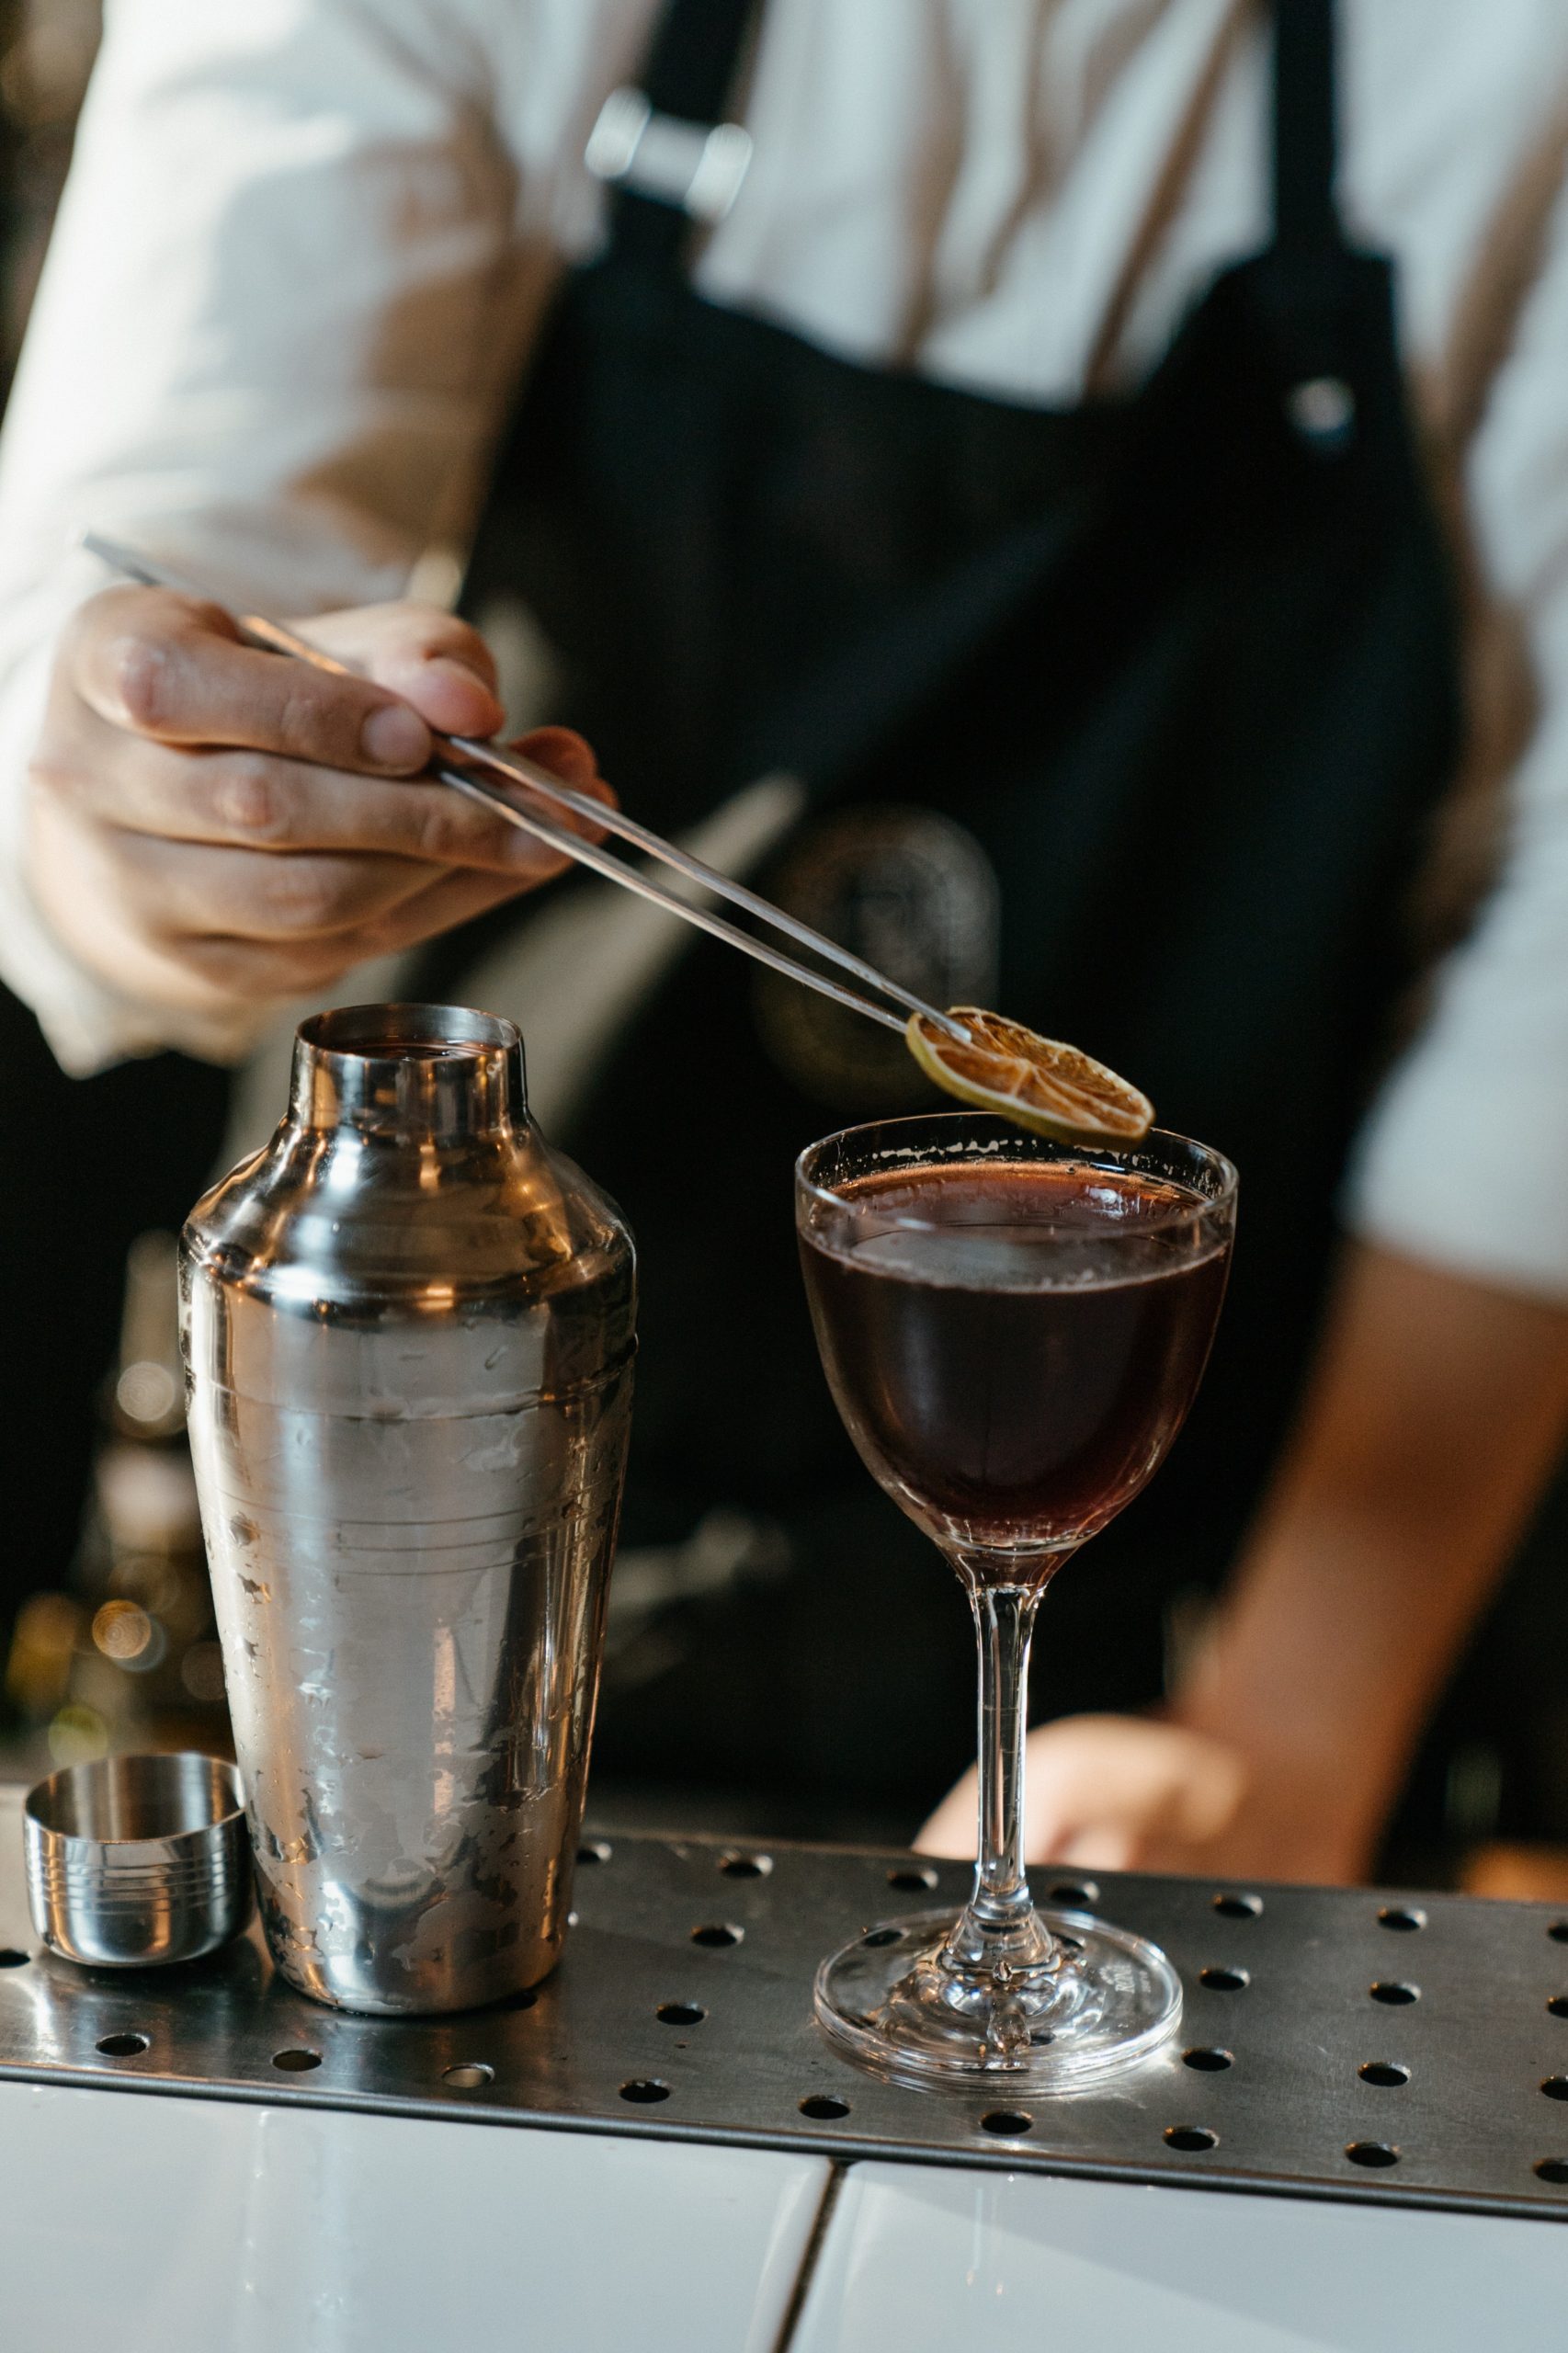 bartender adding a lime garnis to a glass of red wine using tweezers